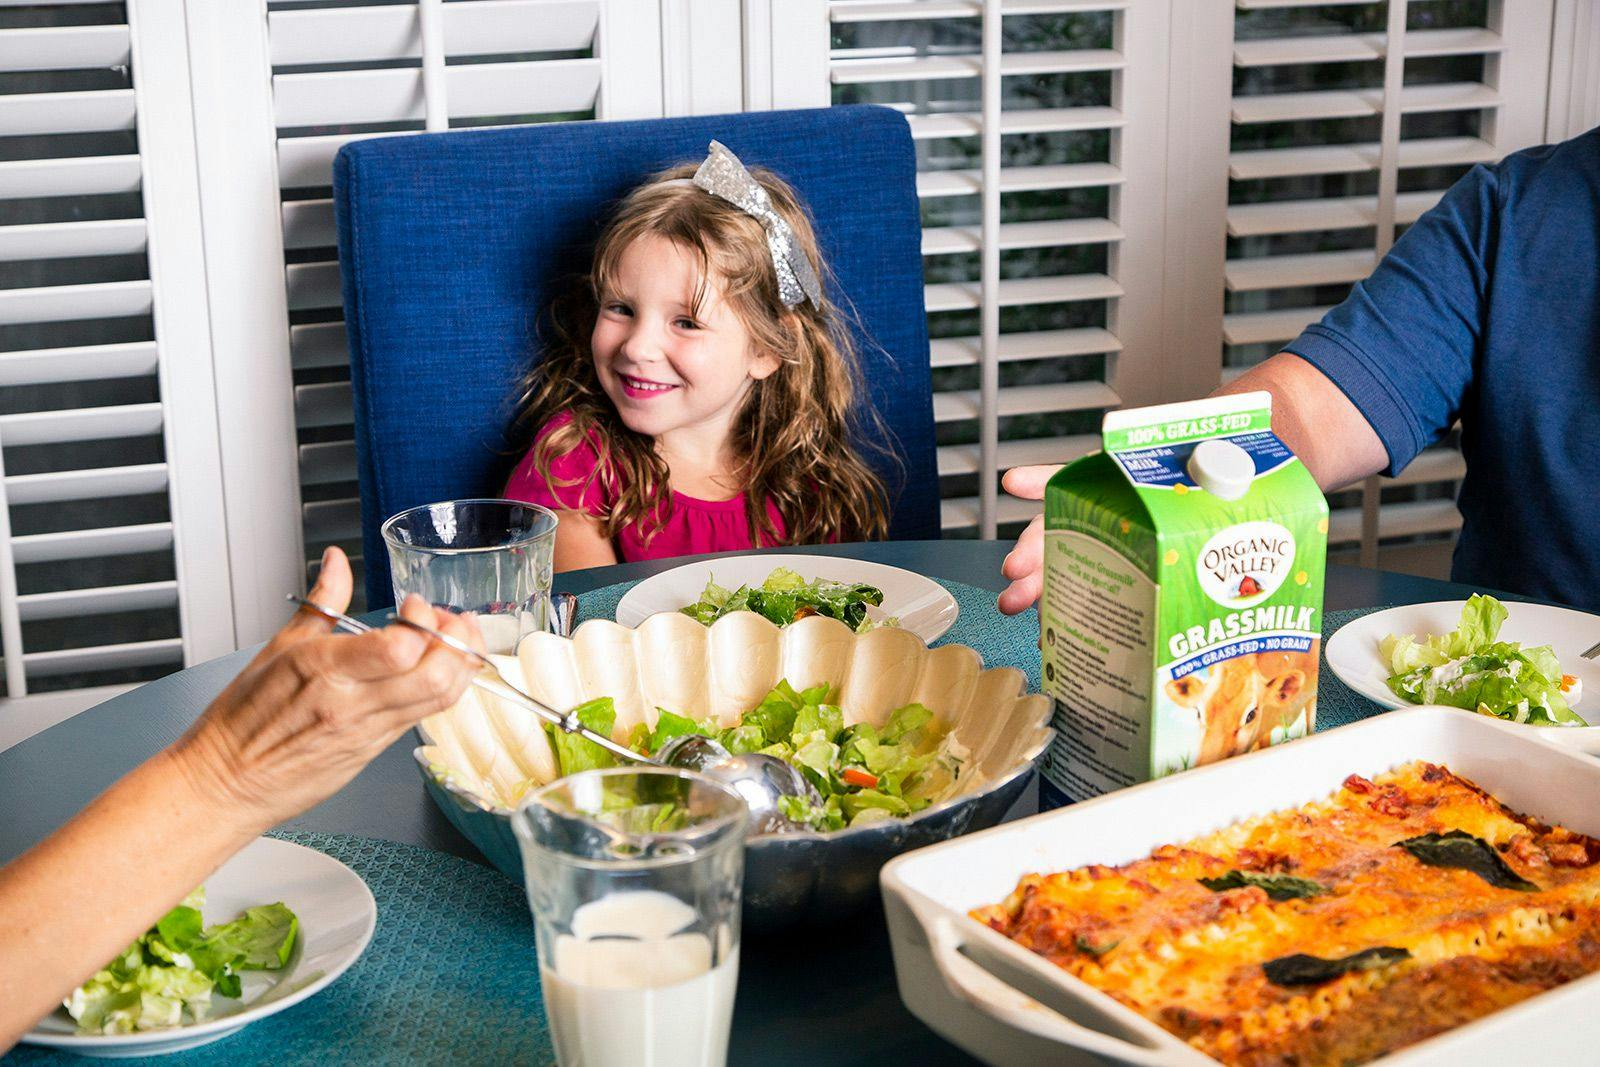 A little girl sits at the dinner table and enjoys a meal of lasagna, salad, and Organic Valley Grassmilk.